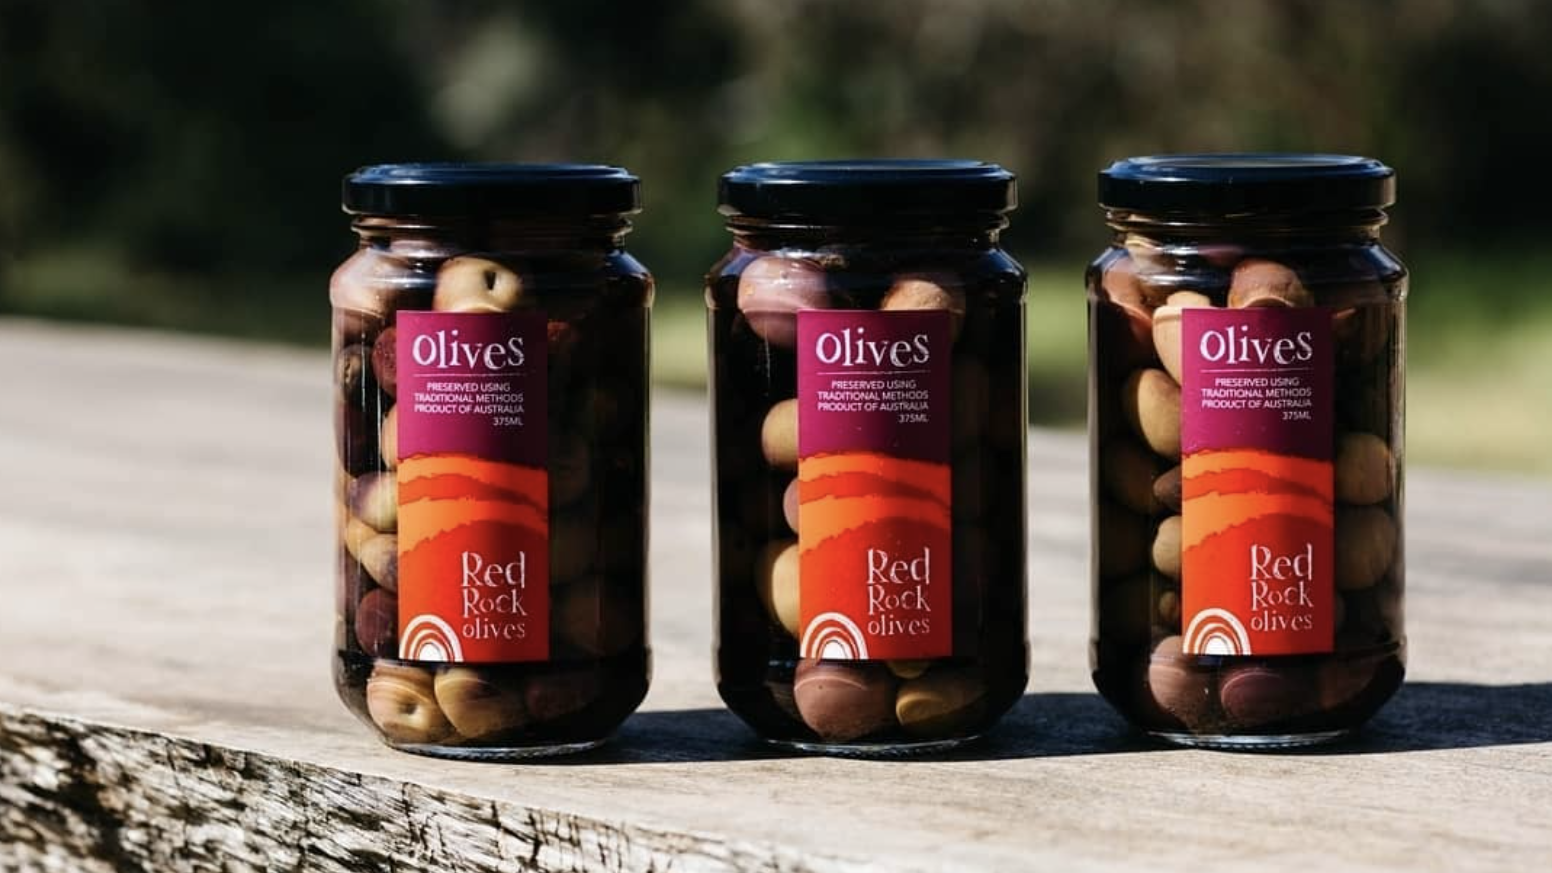 Red Rock Olives Mixed jars